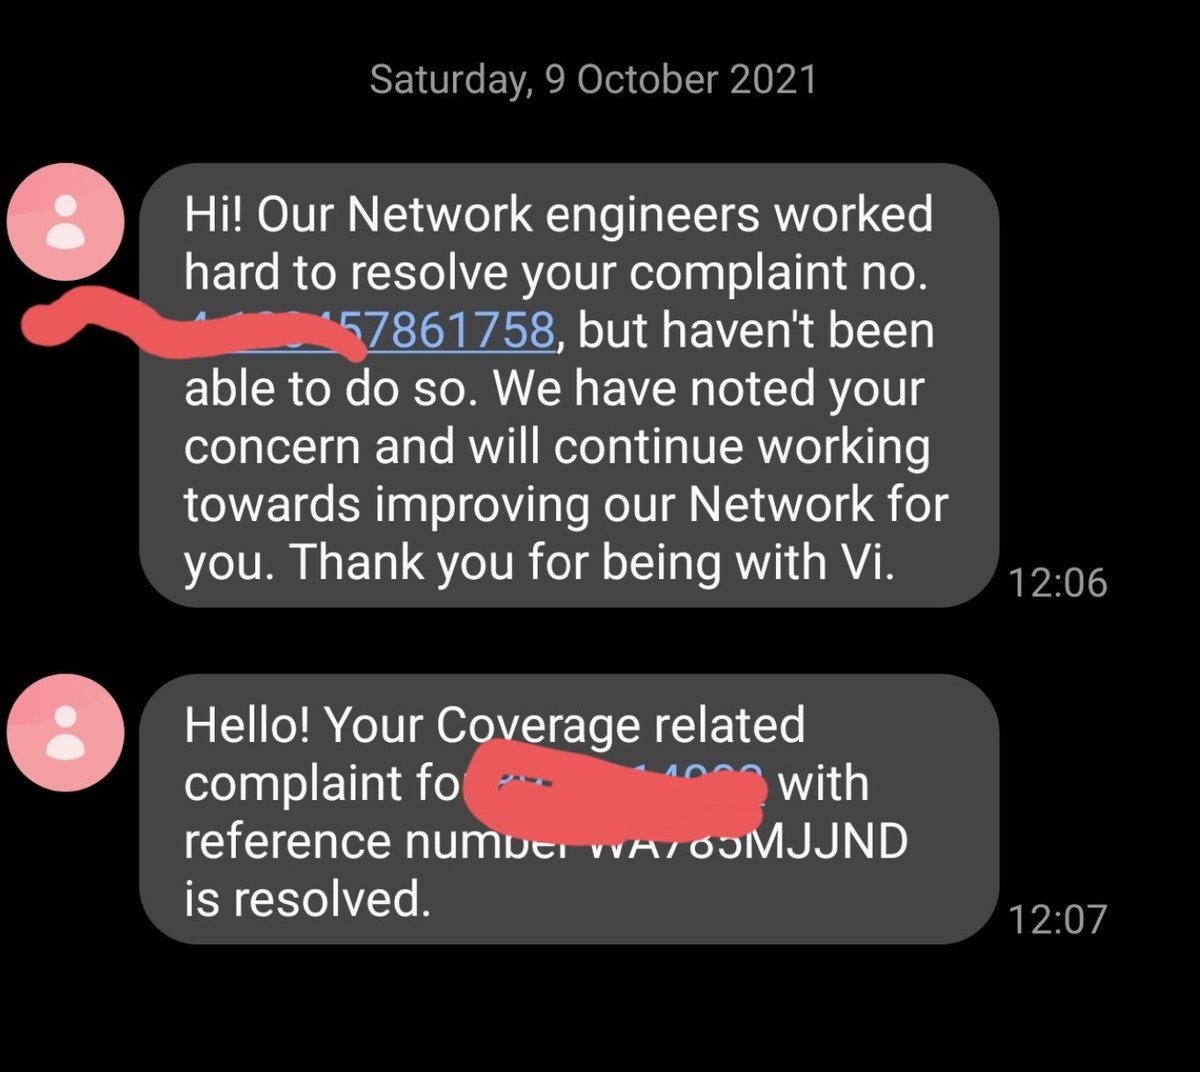 #VodafoneIdea #Vodafonedown #idea #VIcustomercare
#Vi #Vicustomer
#complaint  Ther is hardly any 4G signal and reception is below par and a customer care representative called me today to discuss on the problem and very after the call I got this message